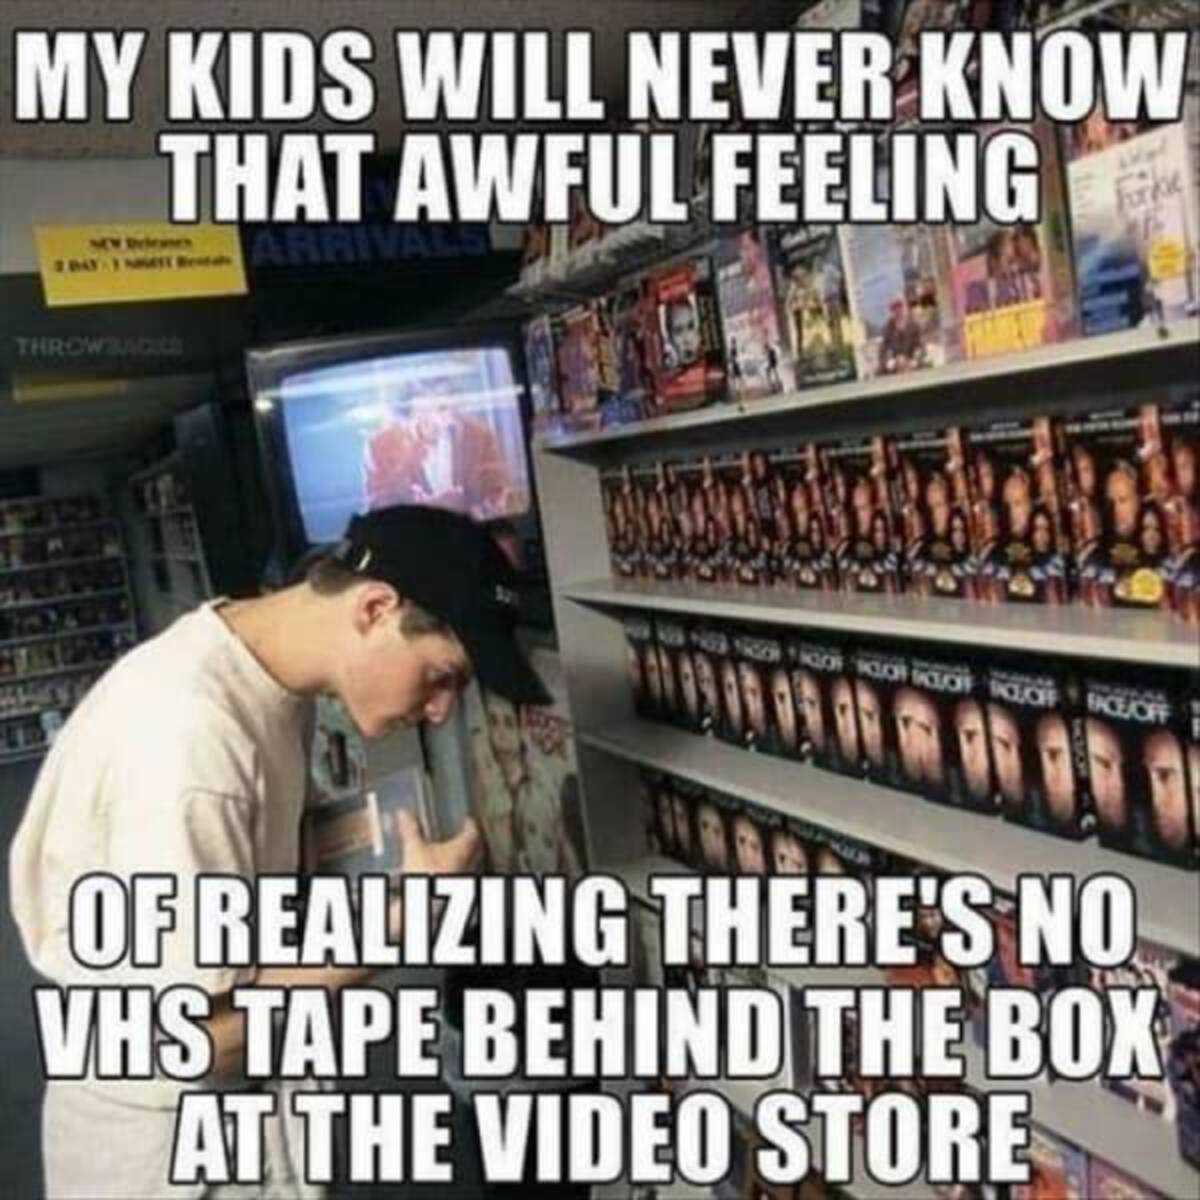 nostalgia meme - My Kids Will Never Know That Awful Feeling 2 Bay 3 Mm Resta Arri Forke Throwbacks Koof Roof Hkloff Off Faceoff Of Realizing There'S No Vhs Tape Behind The Box At The Video Store